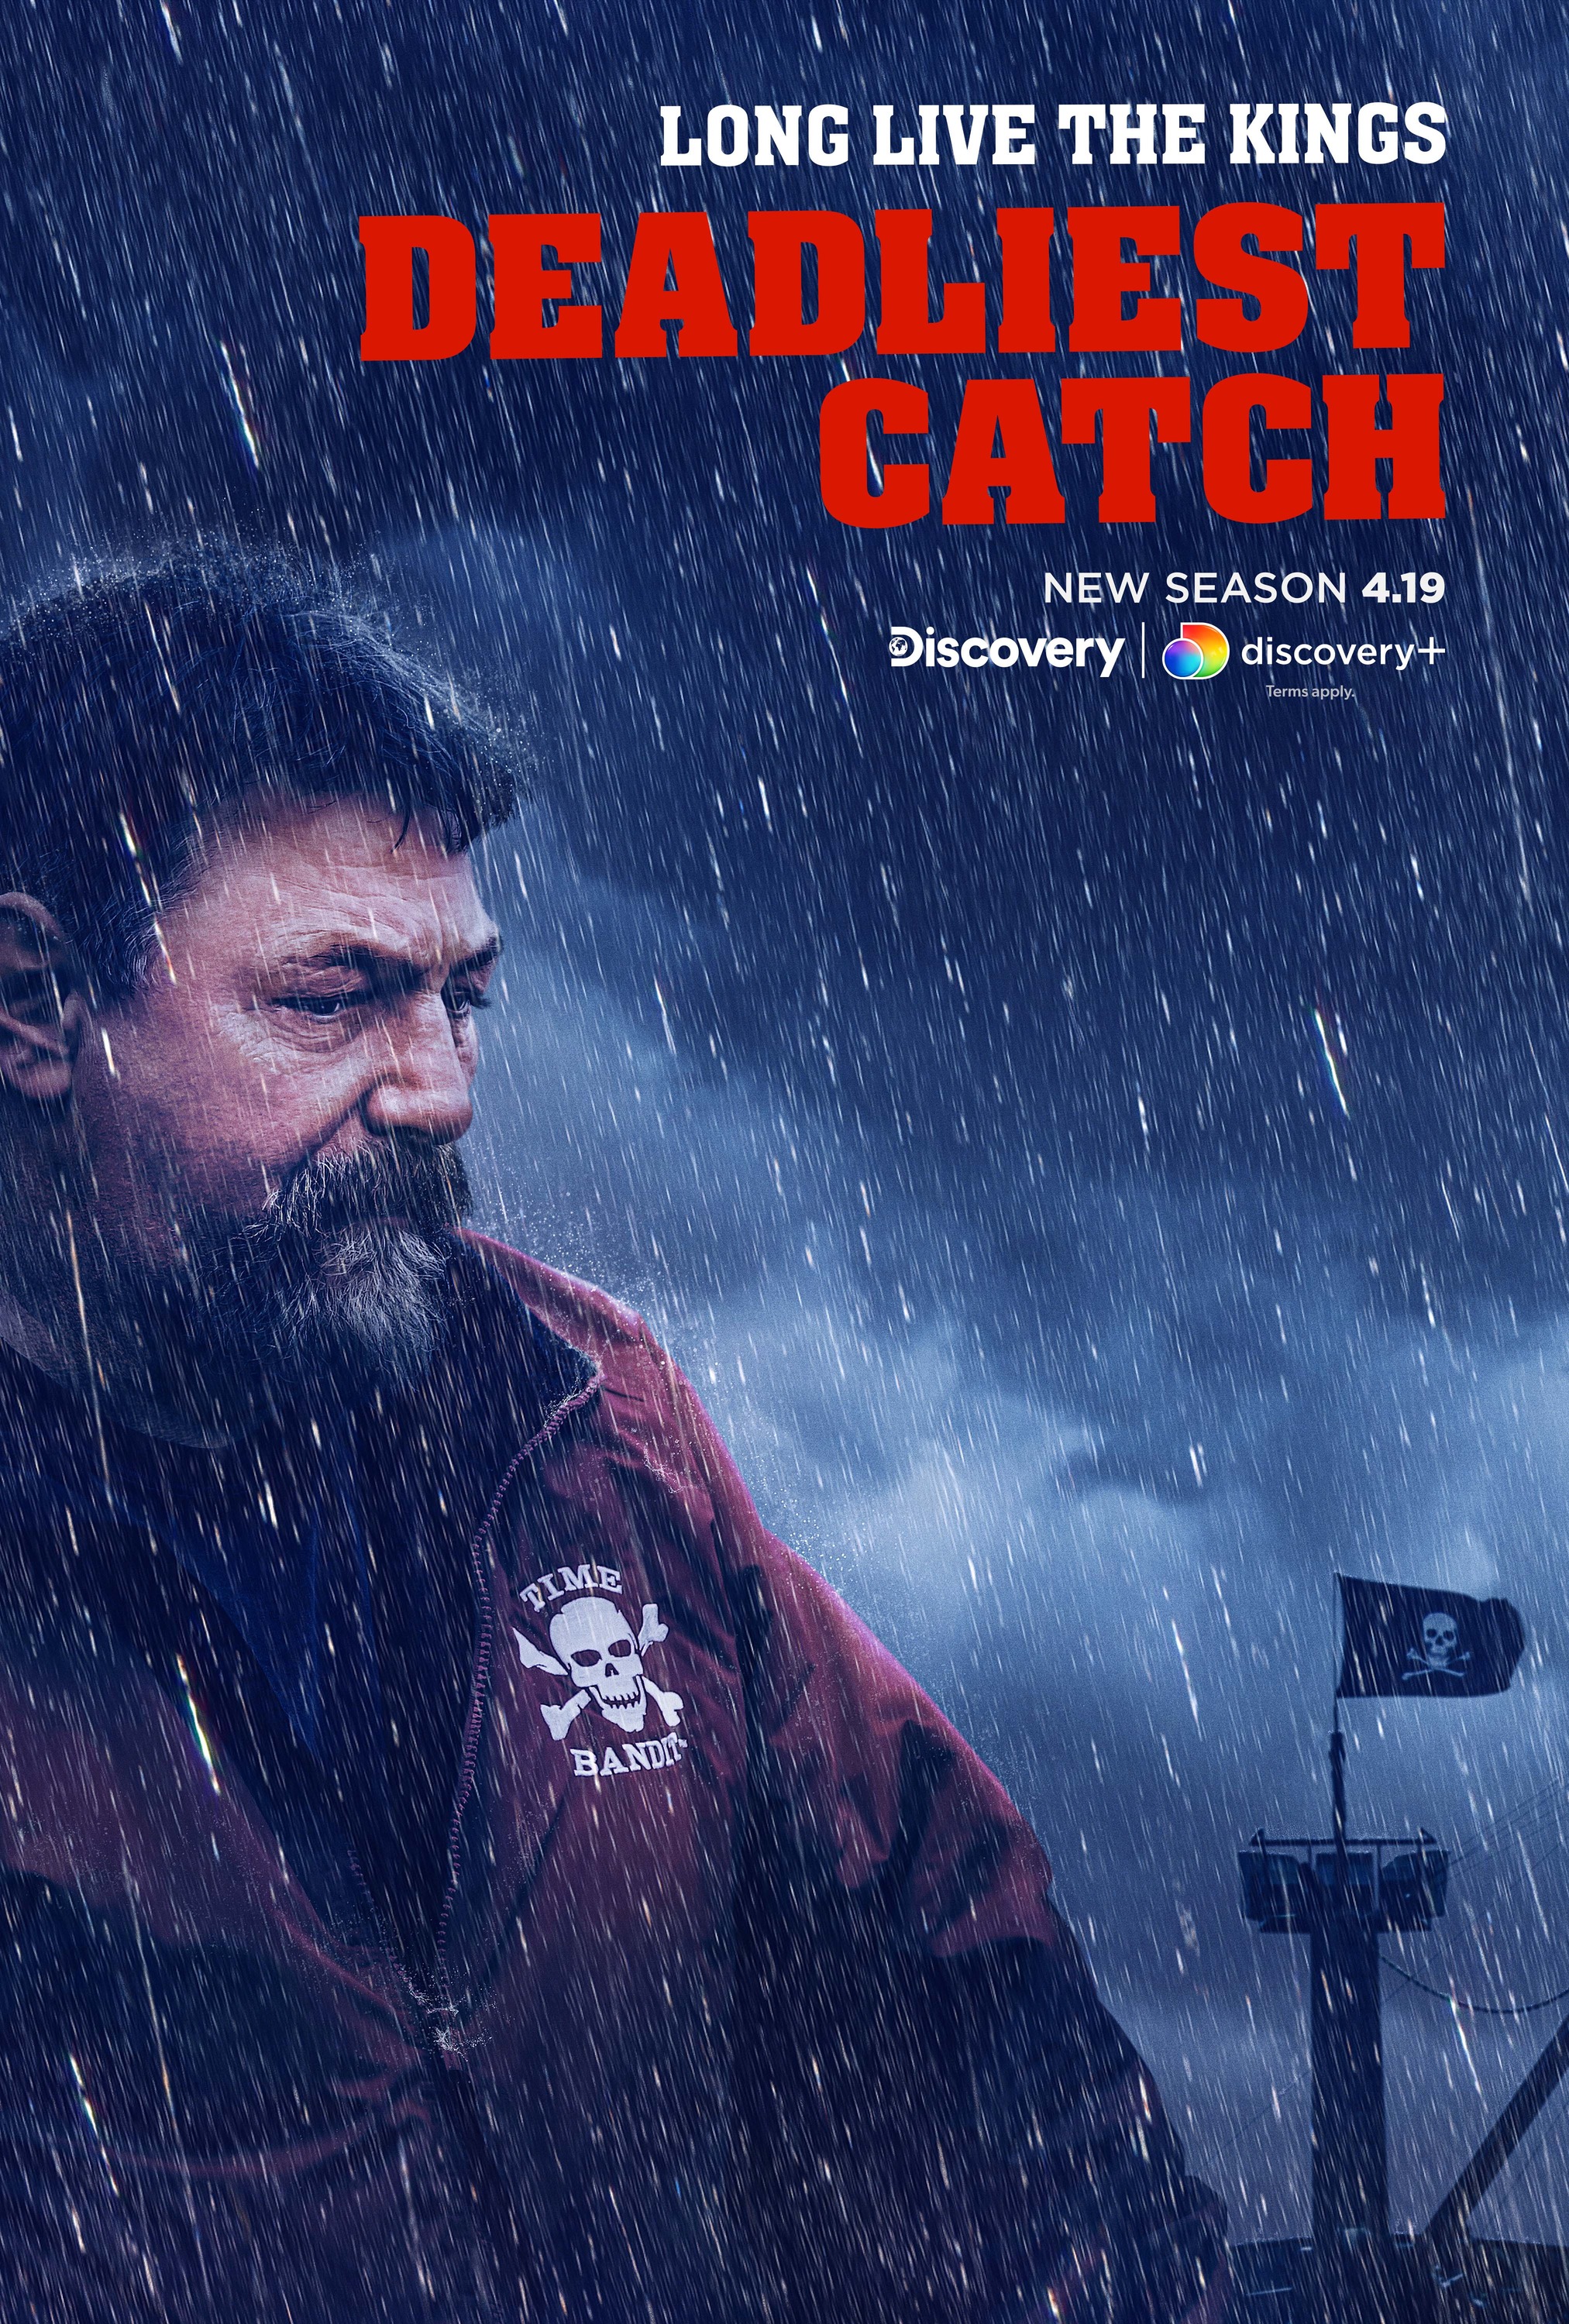 Mega Sized TV Poster Image for Deadliest Catch (#4 of 6)